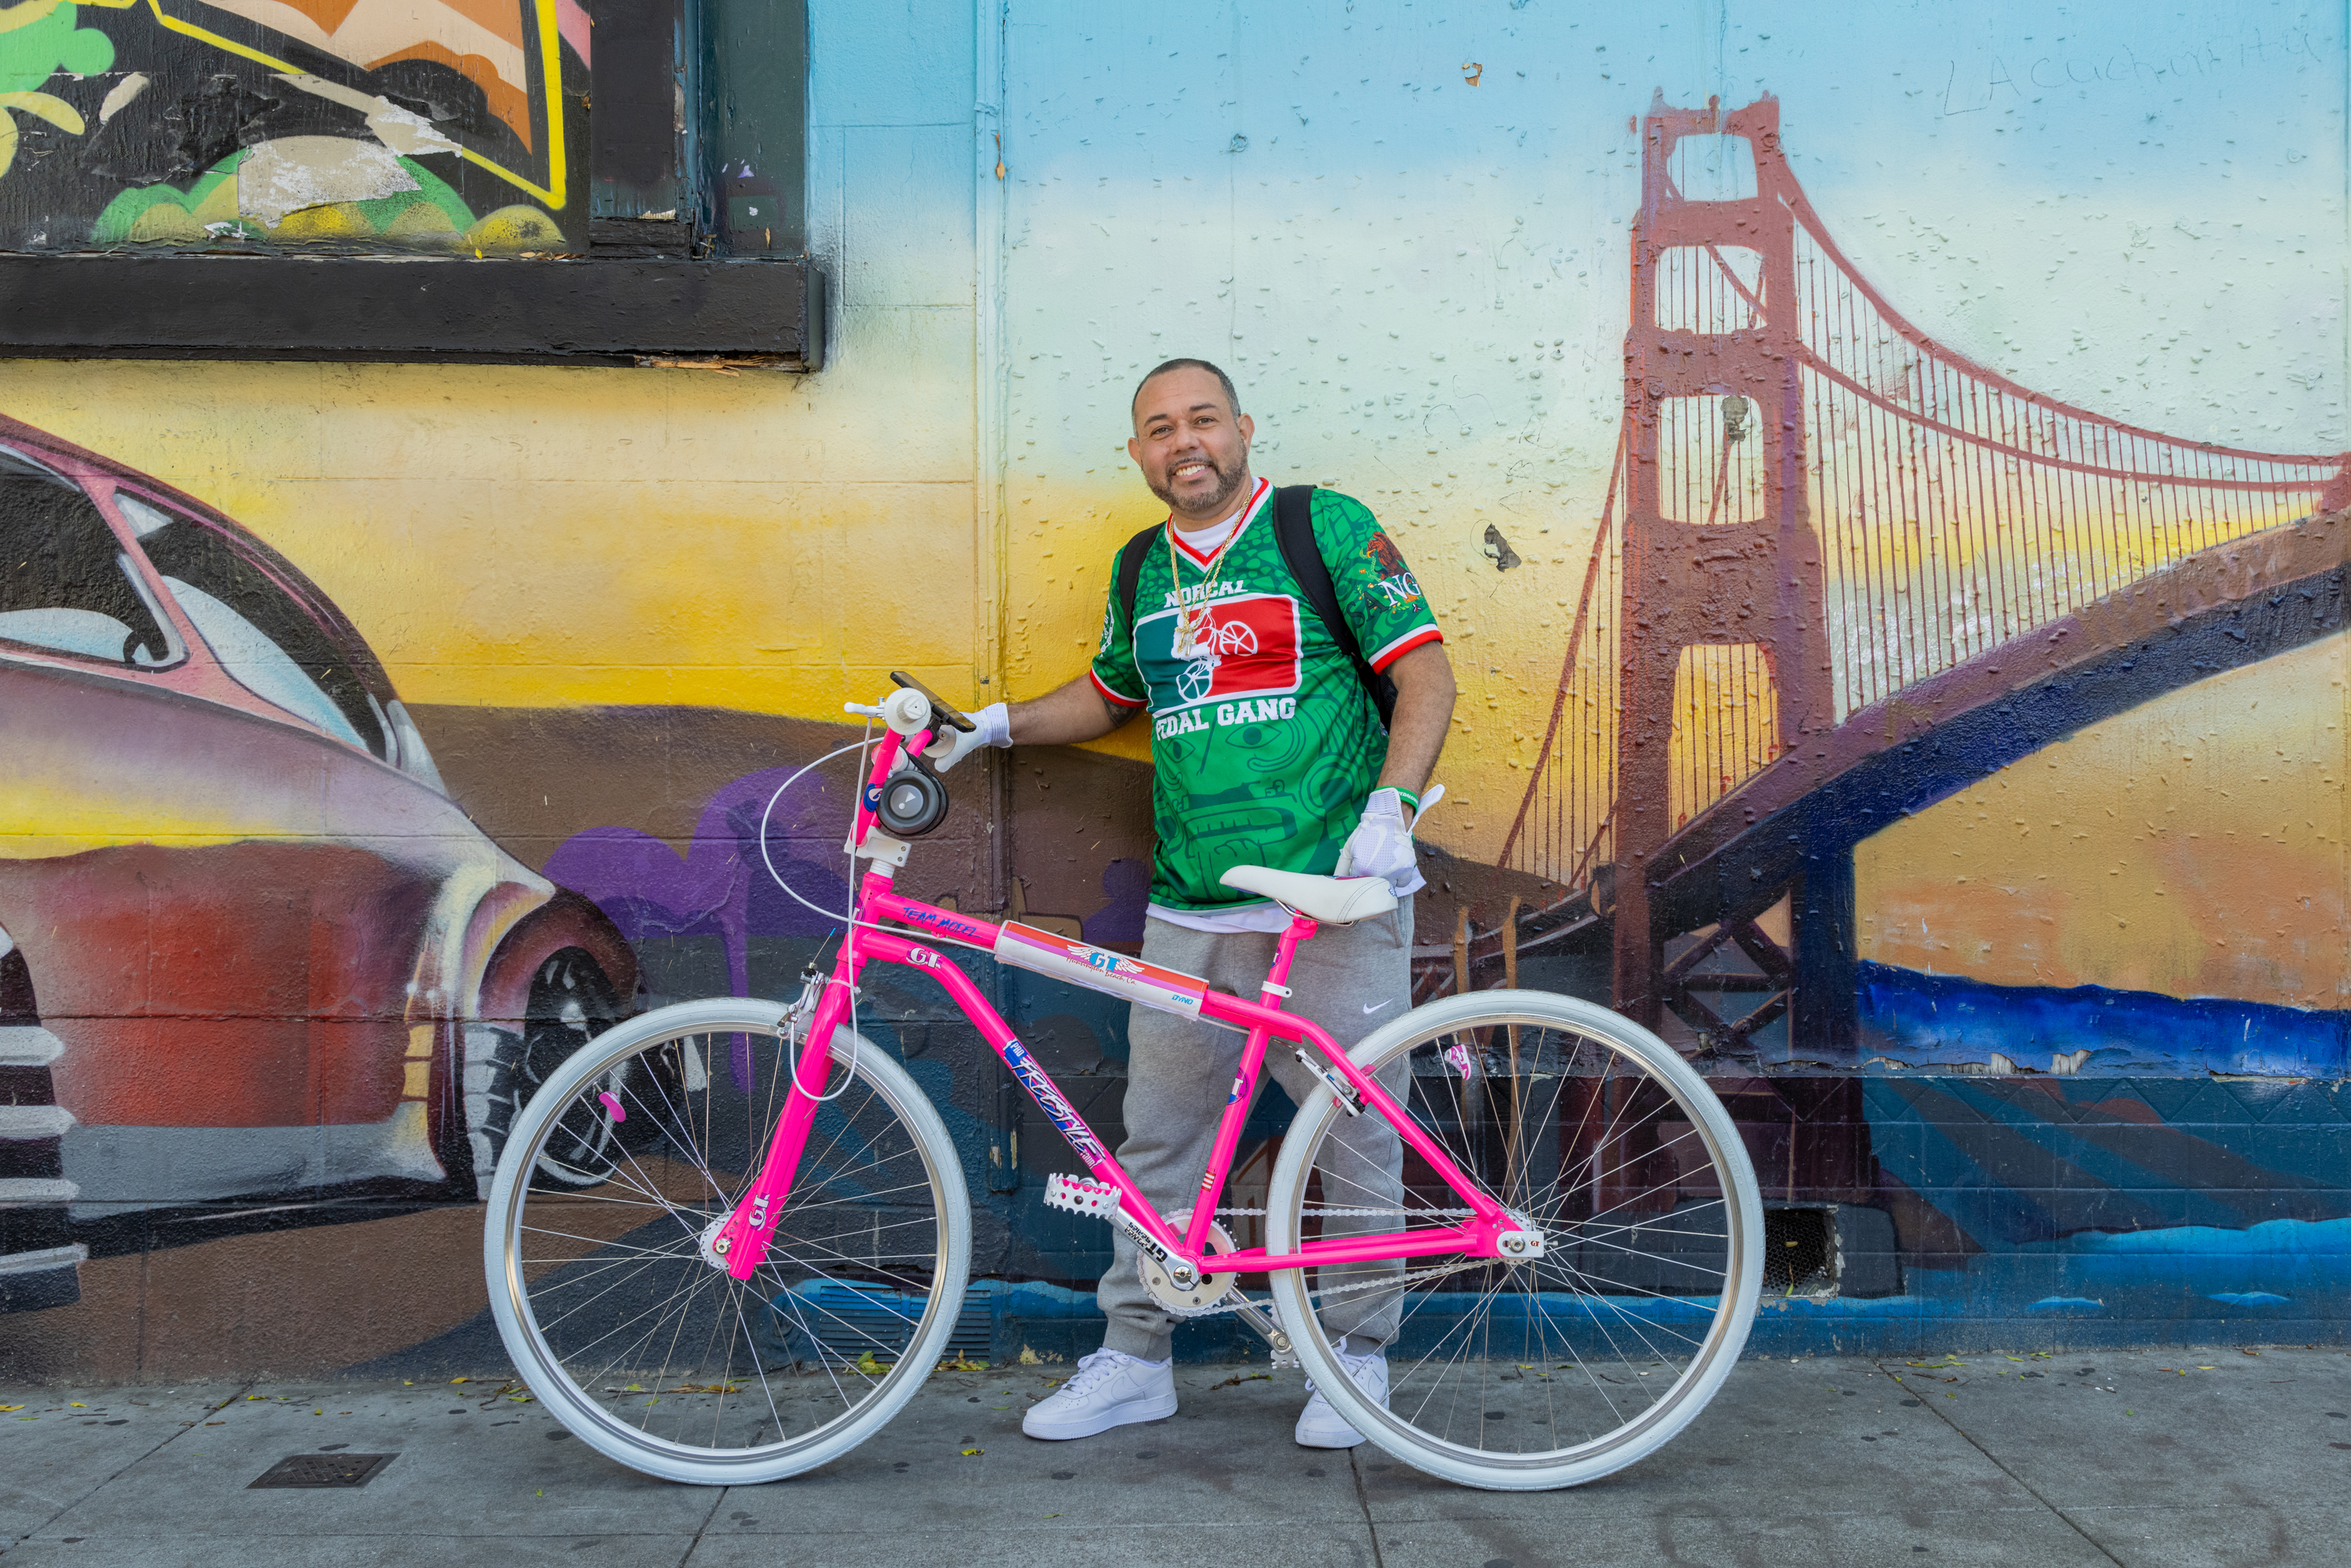 A man stands by a pink bike against a mural with a depiction of the Golden Gate Bridge.